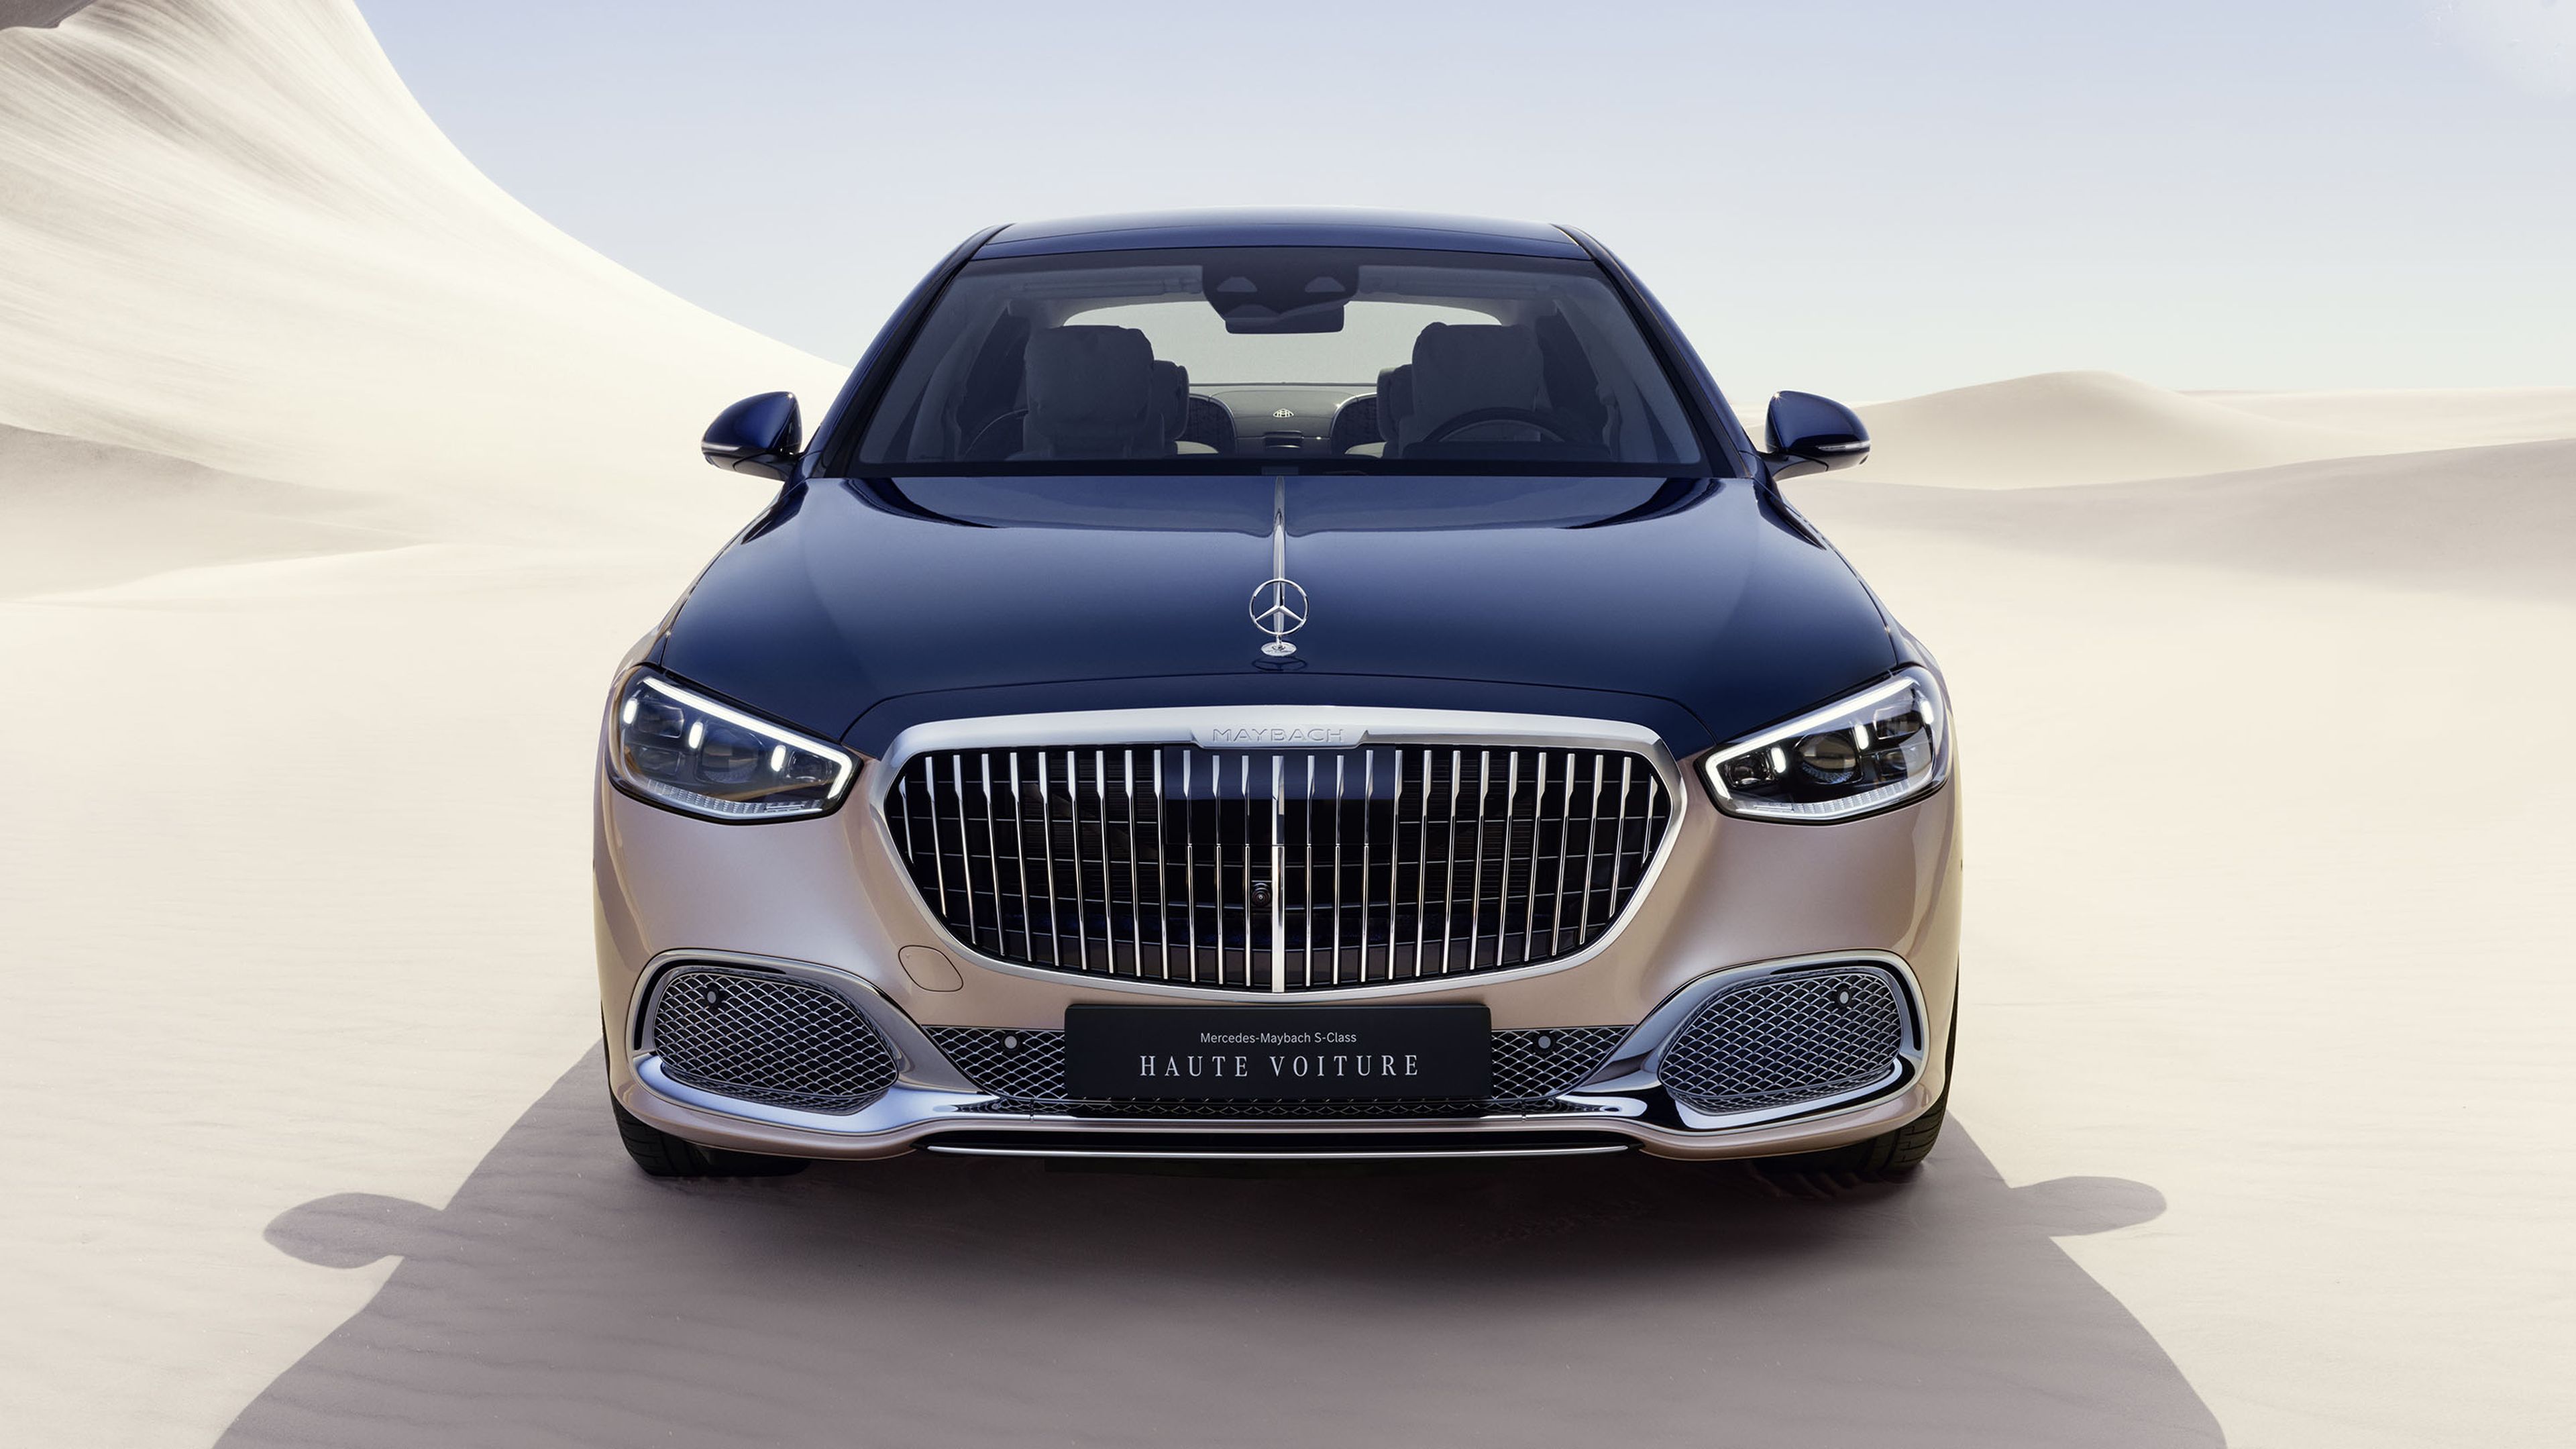 Mercedes-Maybach Clase S Haute Voiture